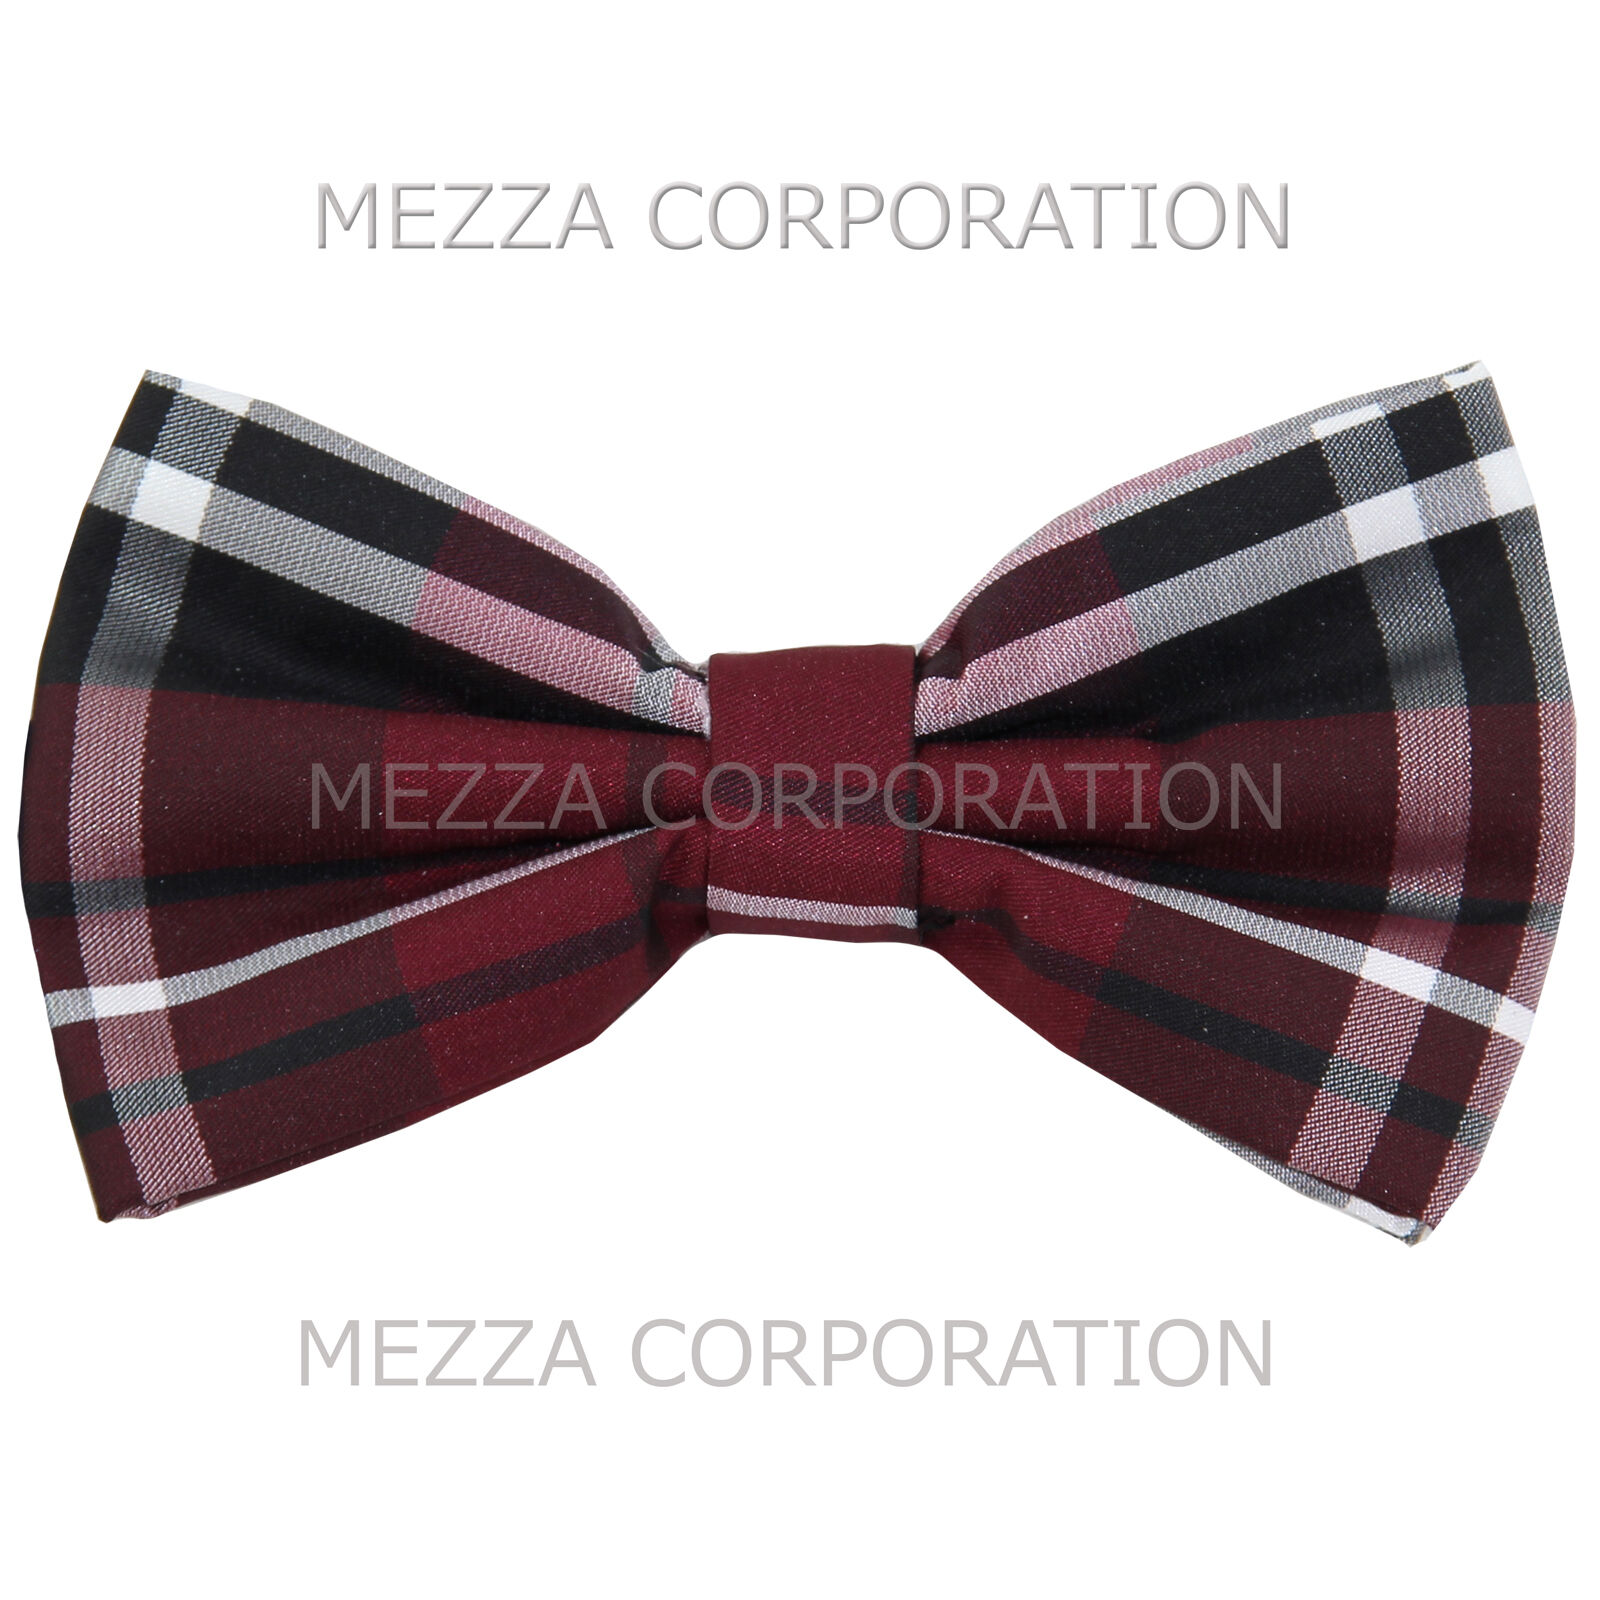 New formal men's pre tied Bow tie plaid & checkers formal wedding party burgundy